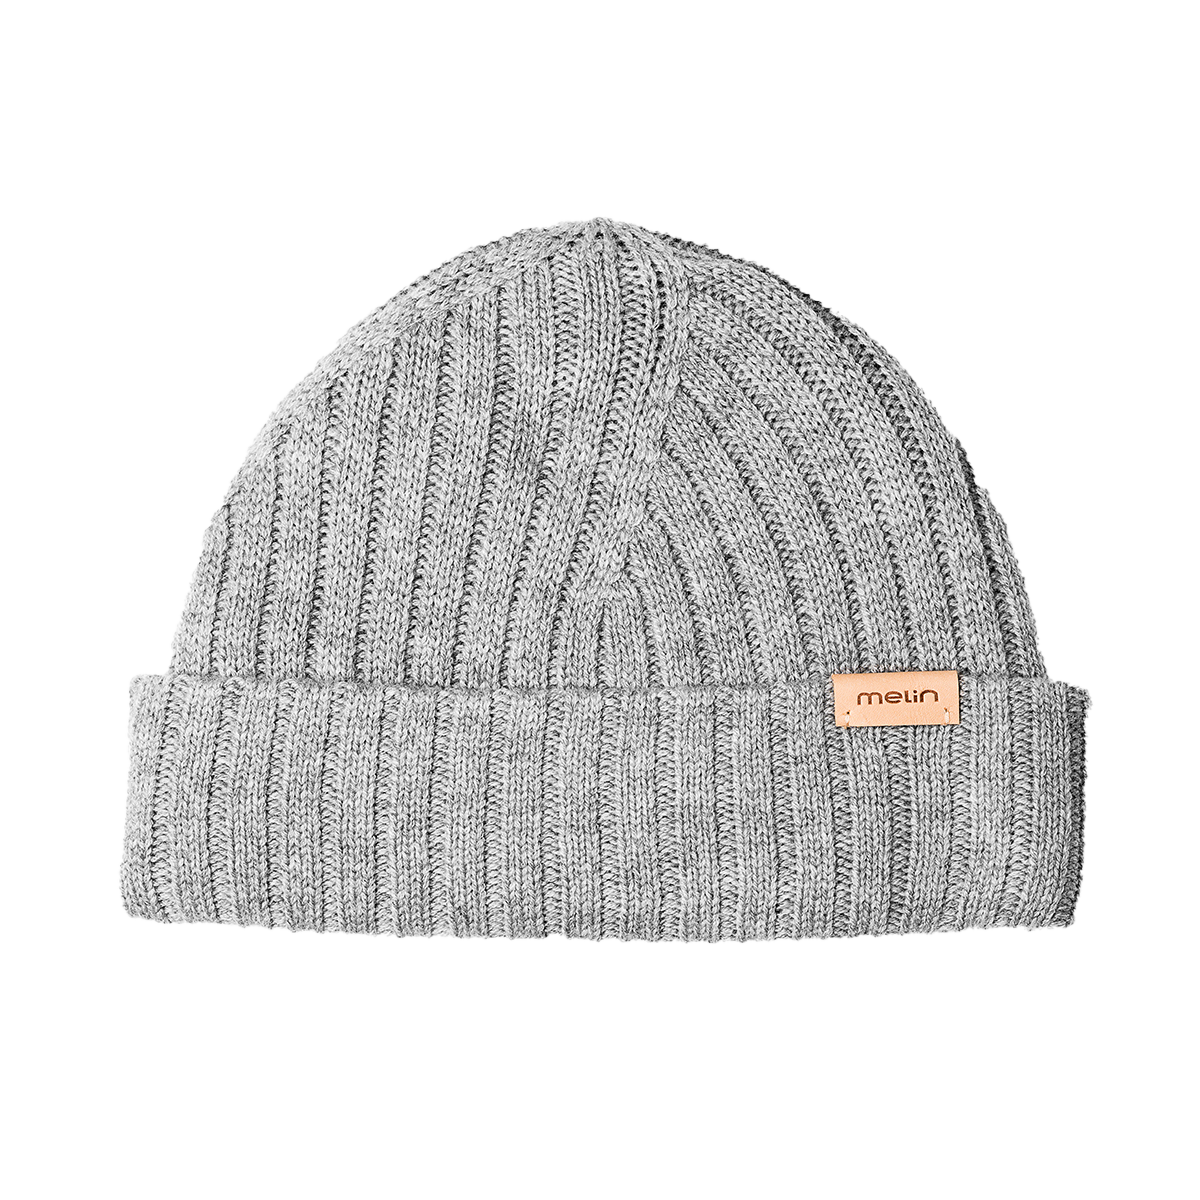 The front view of the Melin All Day Beanie in gray